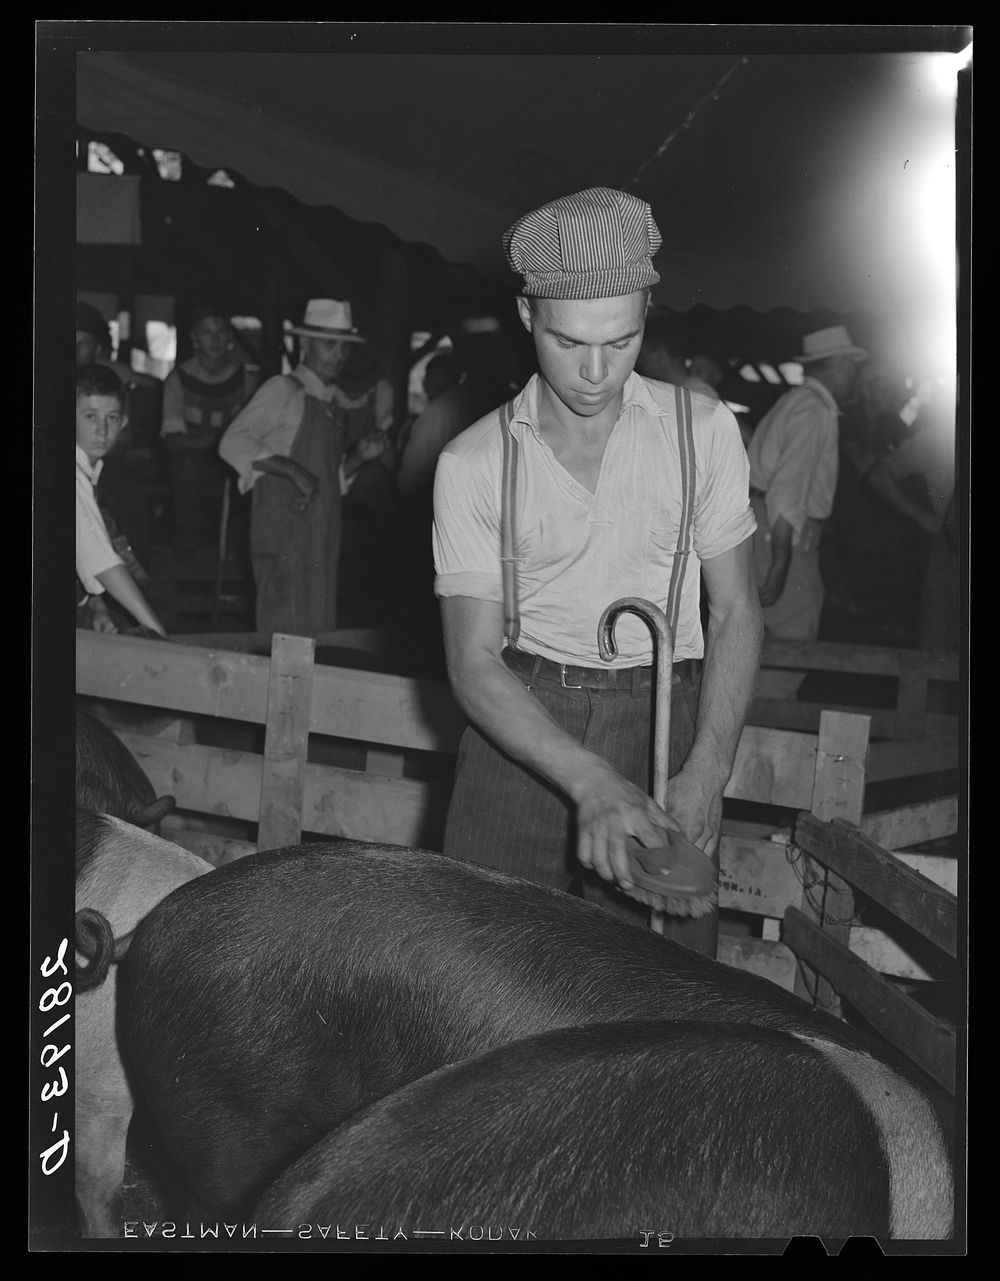 Hogs are carefully brushed before exhibiting. Central Iowa Fair, Marshalltown, Iowa. Sourced from the Library of Congress.